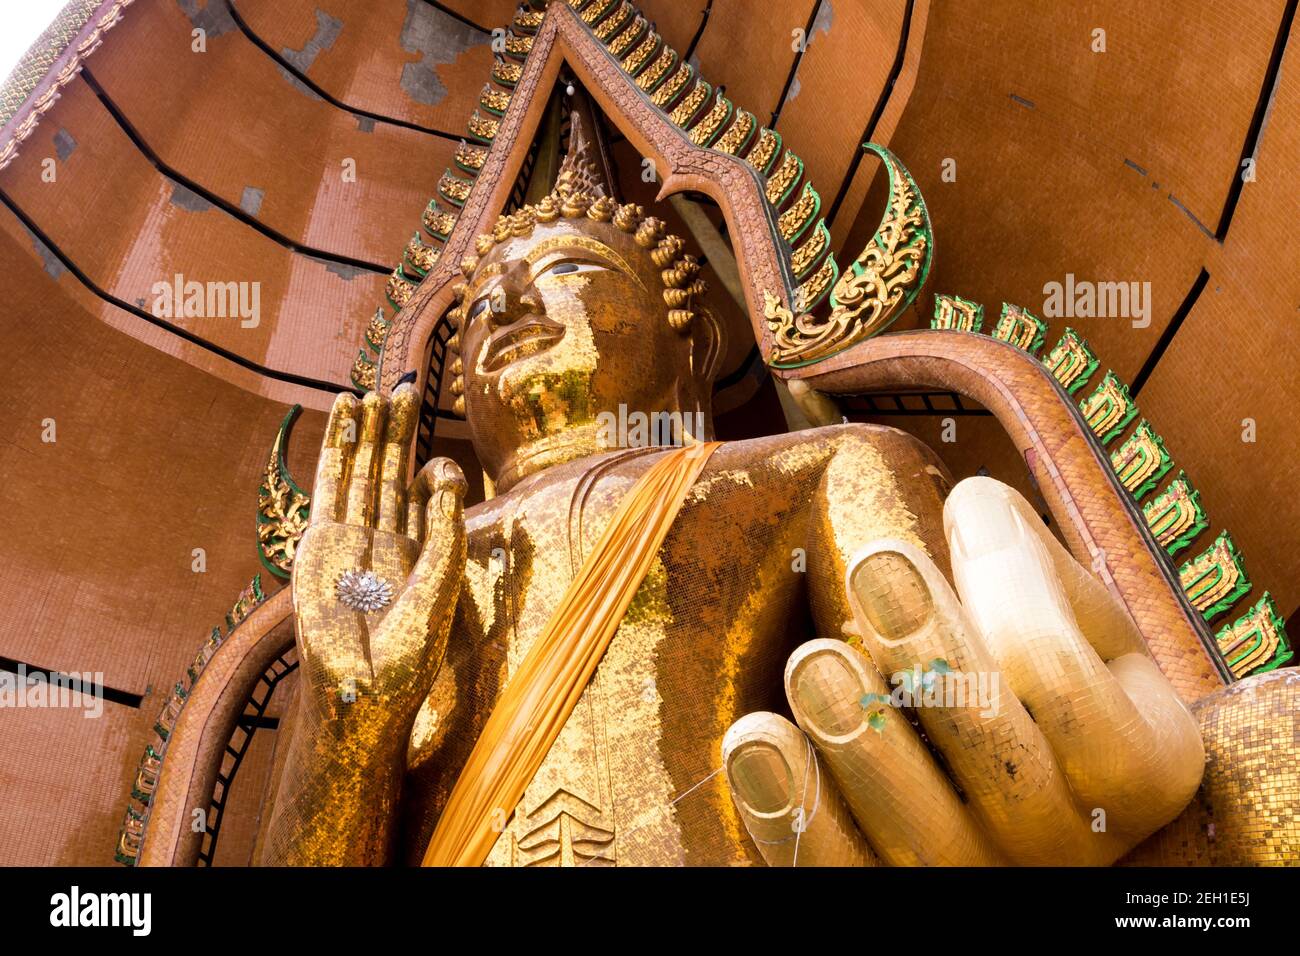 Silver chrysanthemum symbol and gold leaf In the palm of the Buddha statue Stock Photo